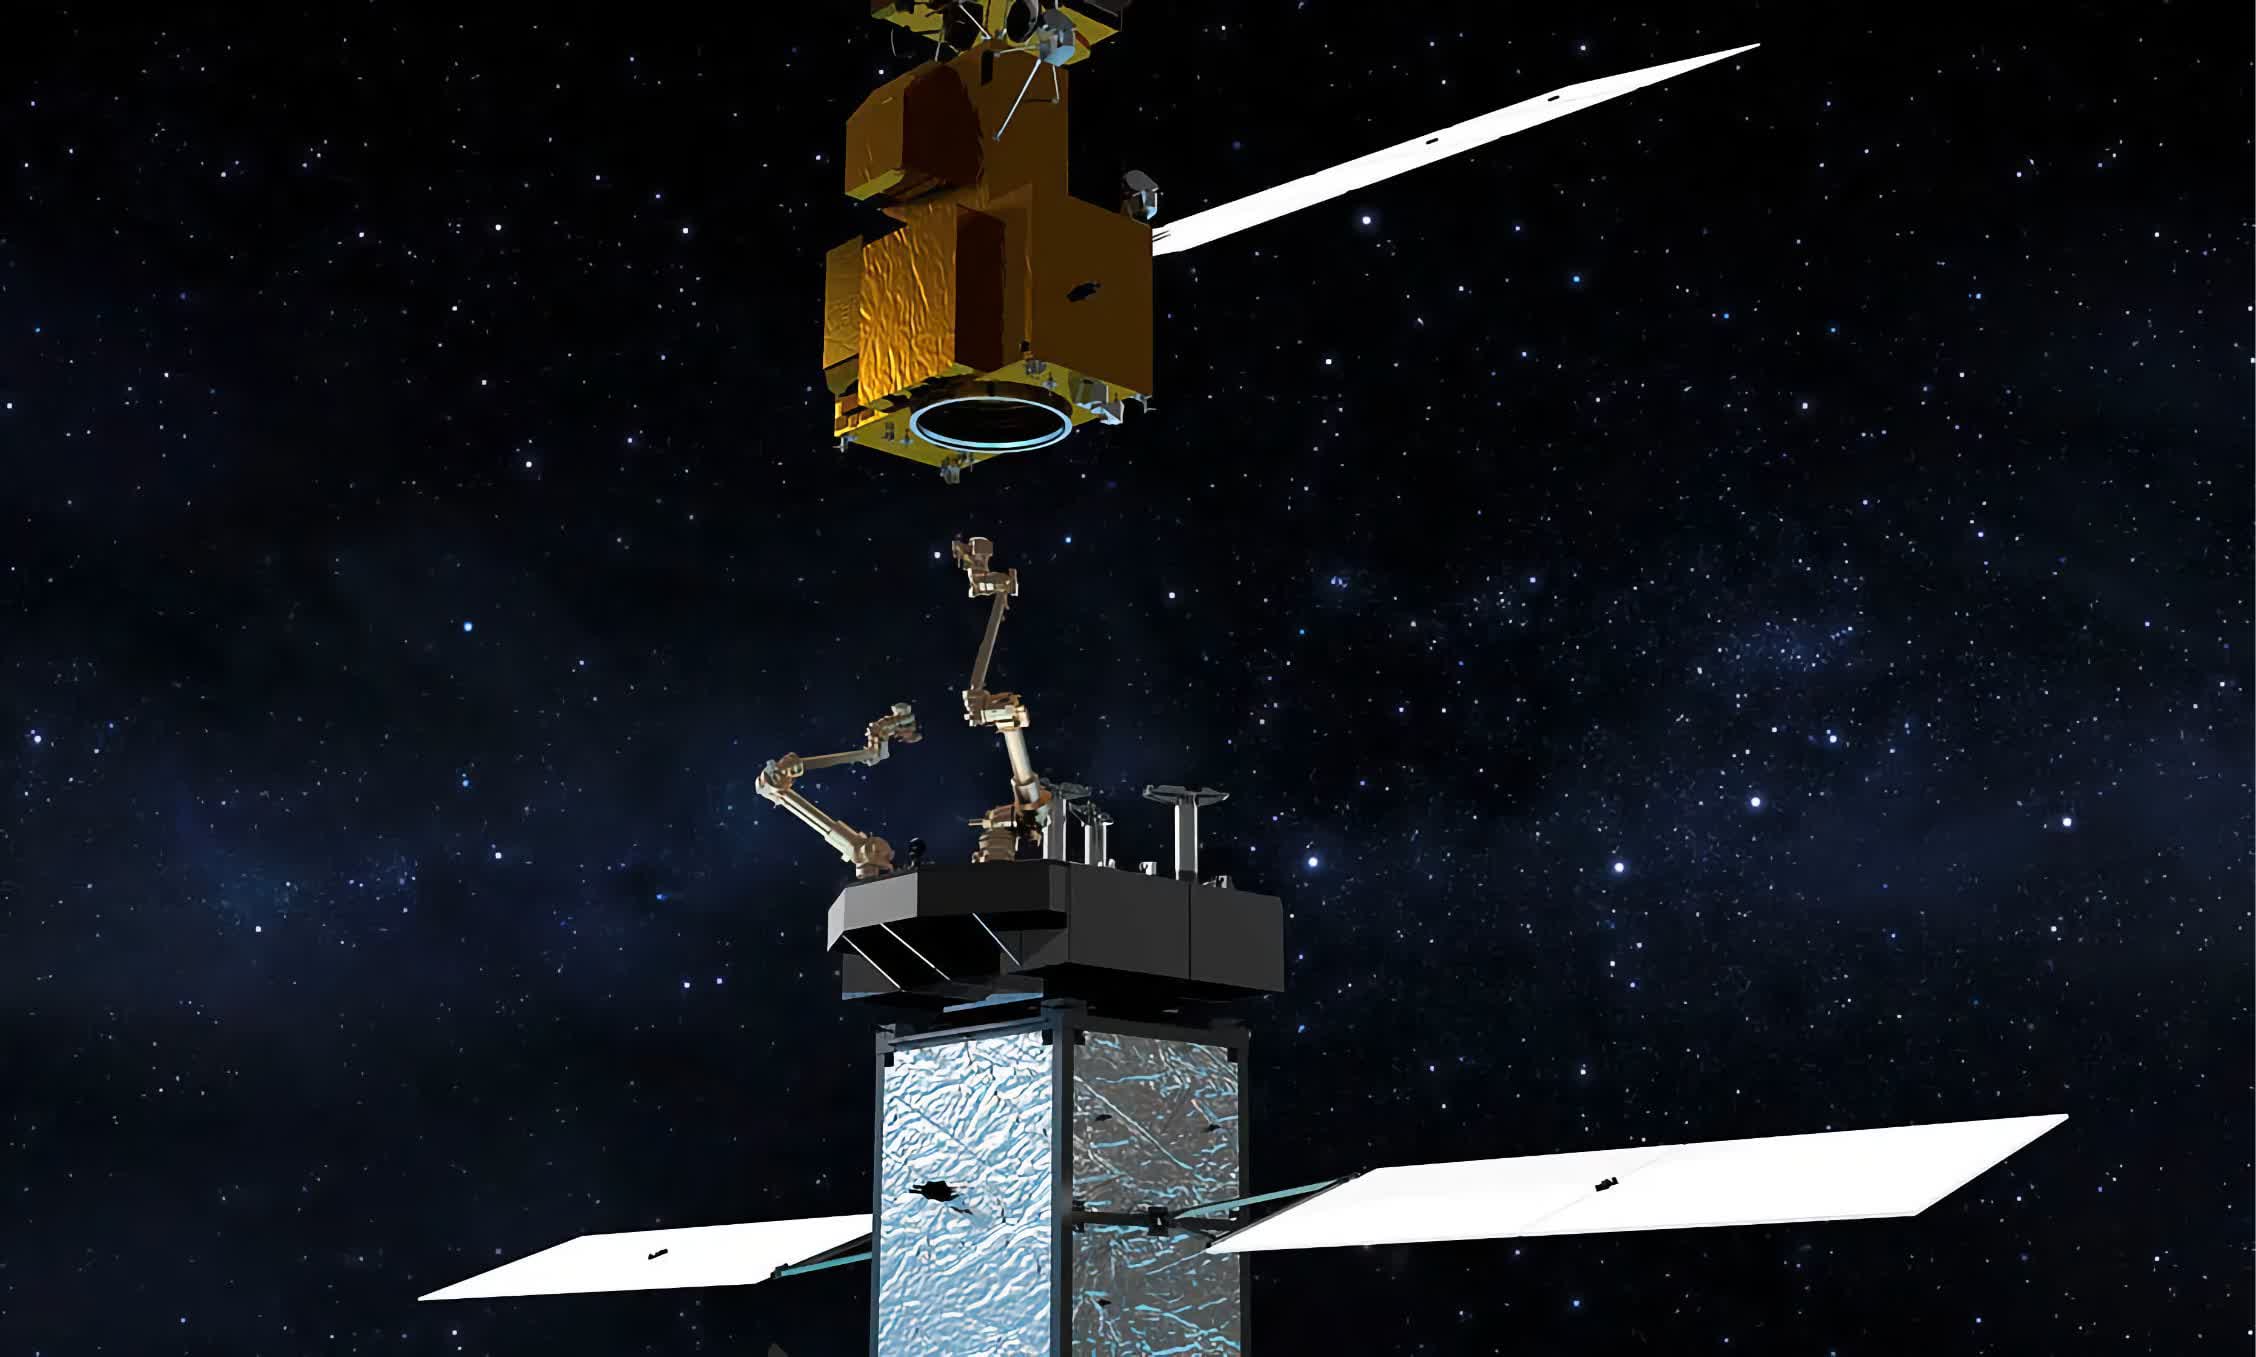 Robots could soon autonomously repair and service satellites in orbit